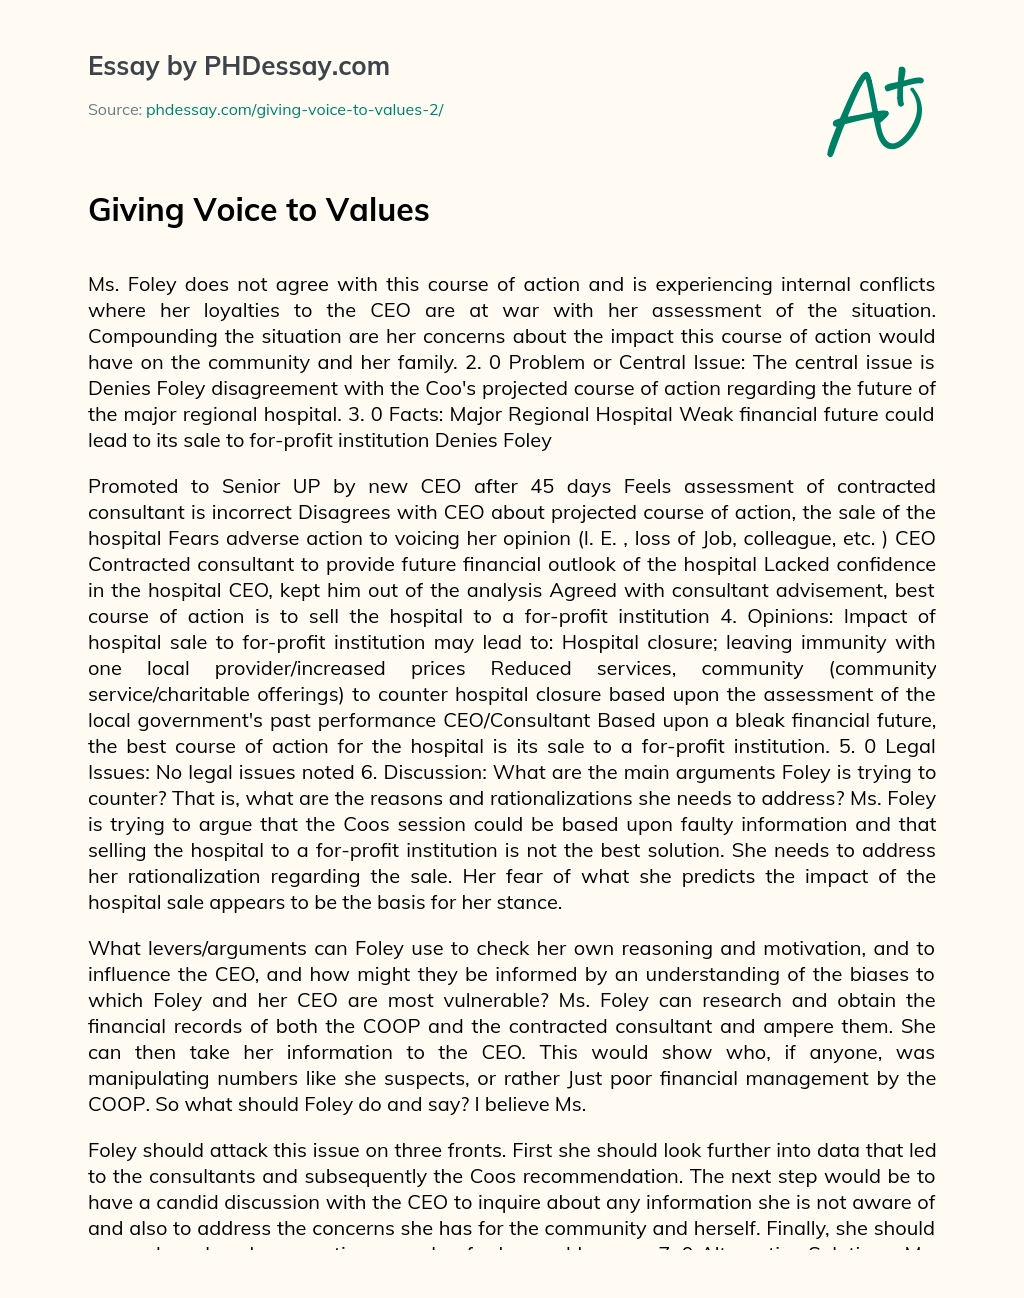 Giving Voice to Values essay